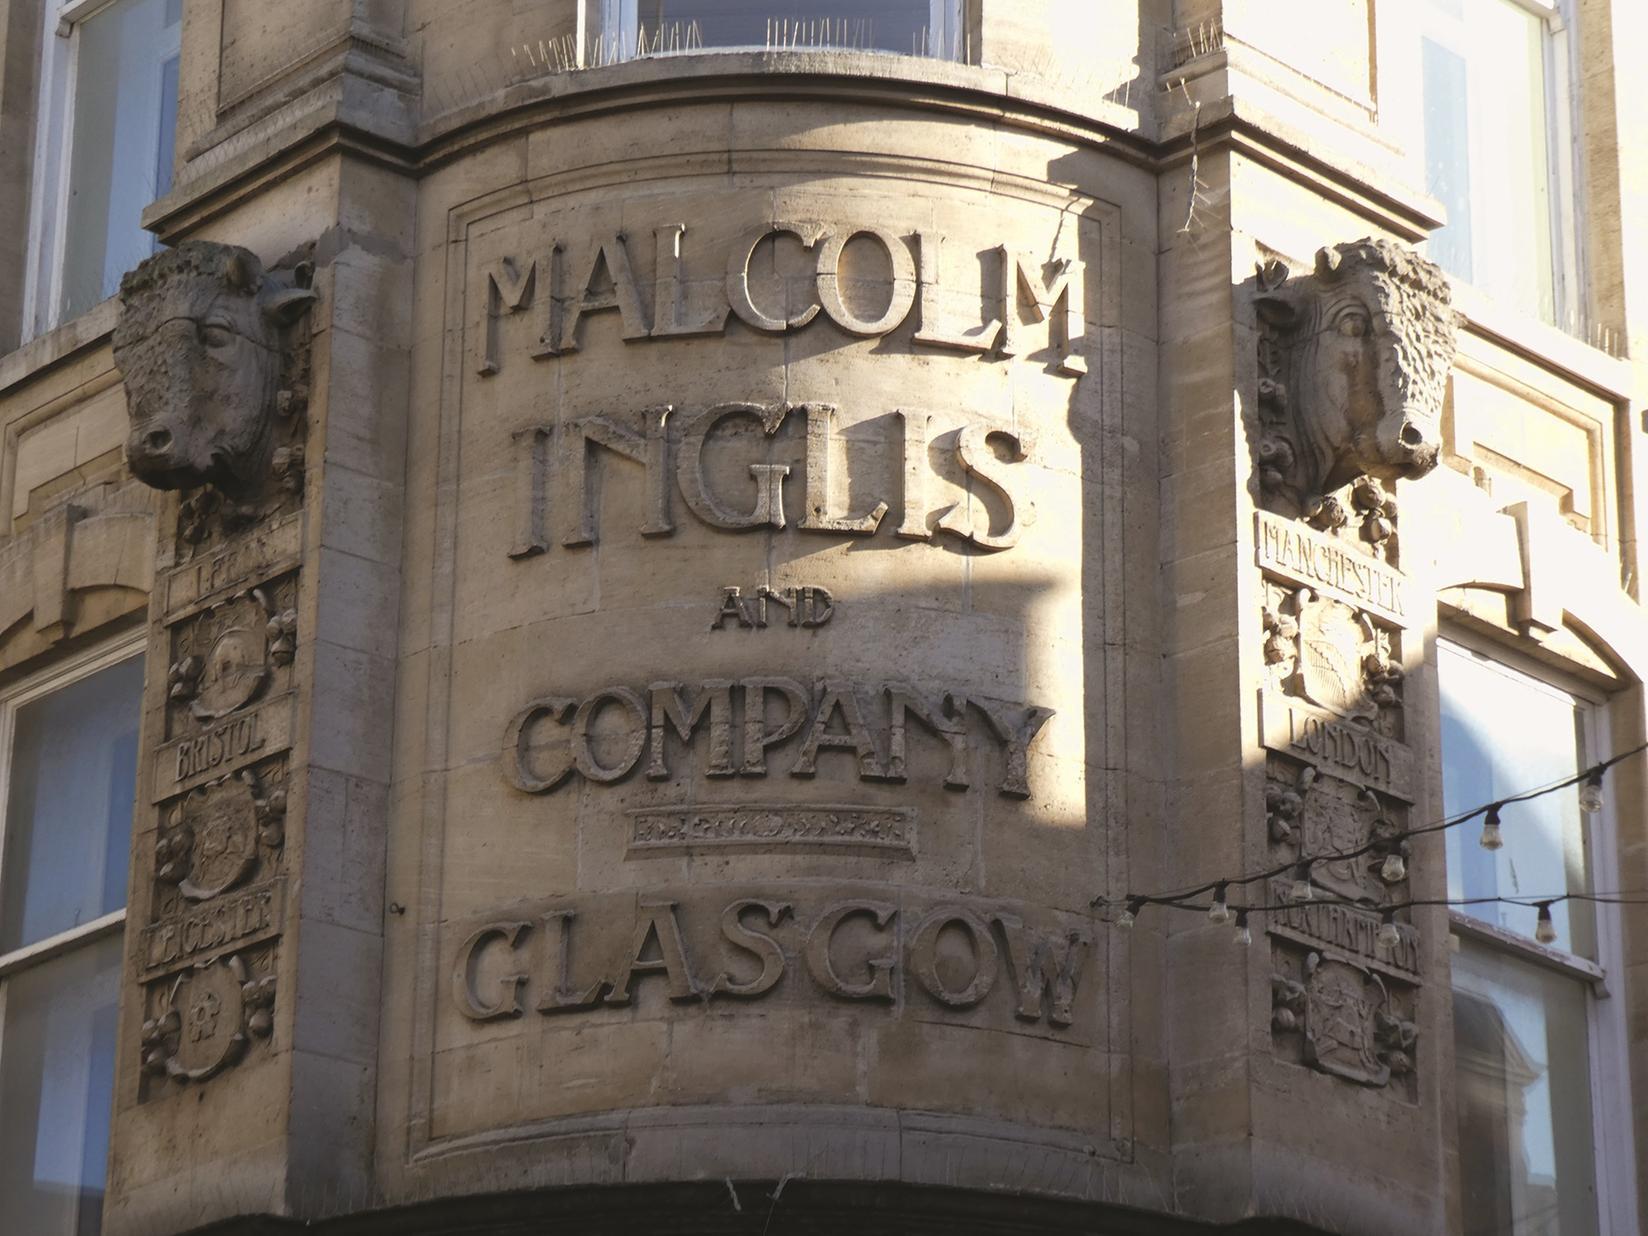 The former Malcolm Inglis and Company building is grade II-listed and was built in 1900 for the leather and hide importers from Glasgow. The building was then used by the council, a pub and now Subway. Photo: Amberley Publishing